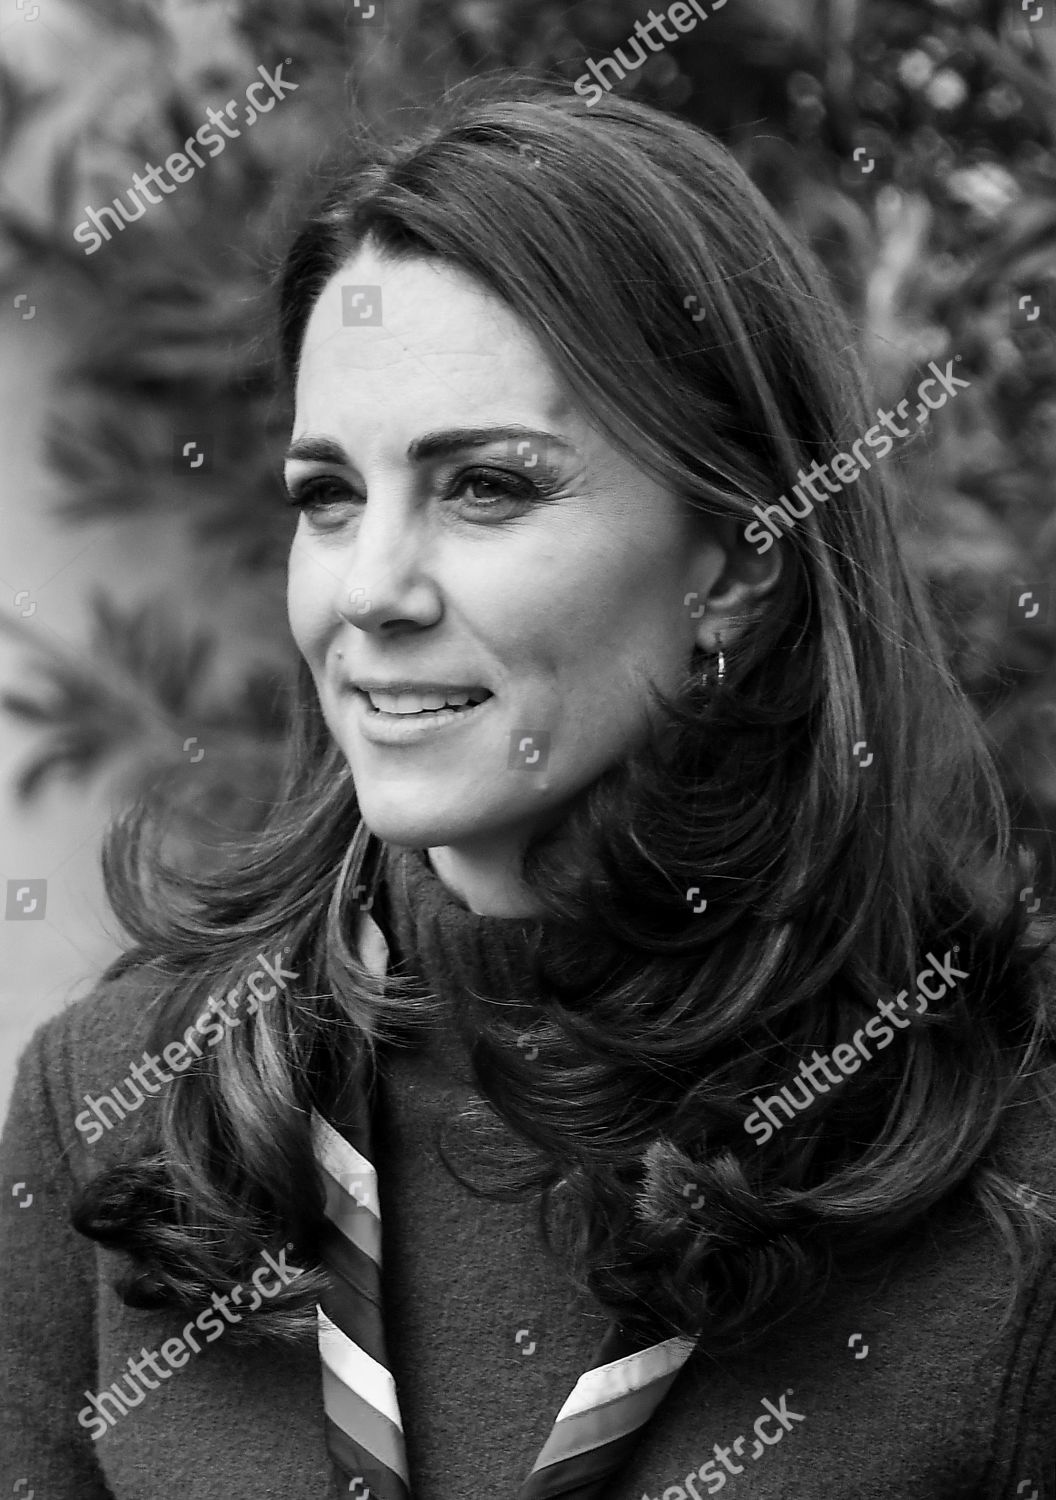 catherine-duchess-of-cambridge-visit-to-the-scouts-headquarters-gilwell-park-essex-uk-shutterstock-editorial-10179979cp.jpg